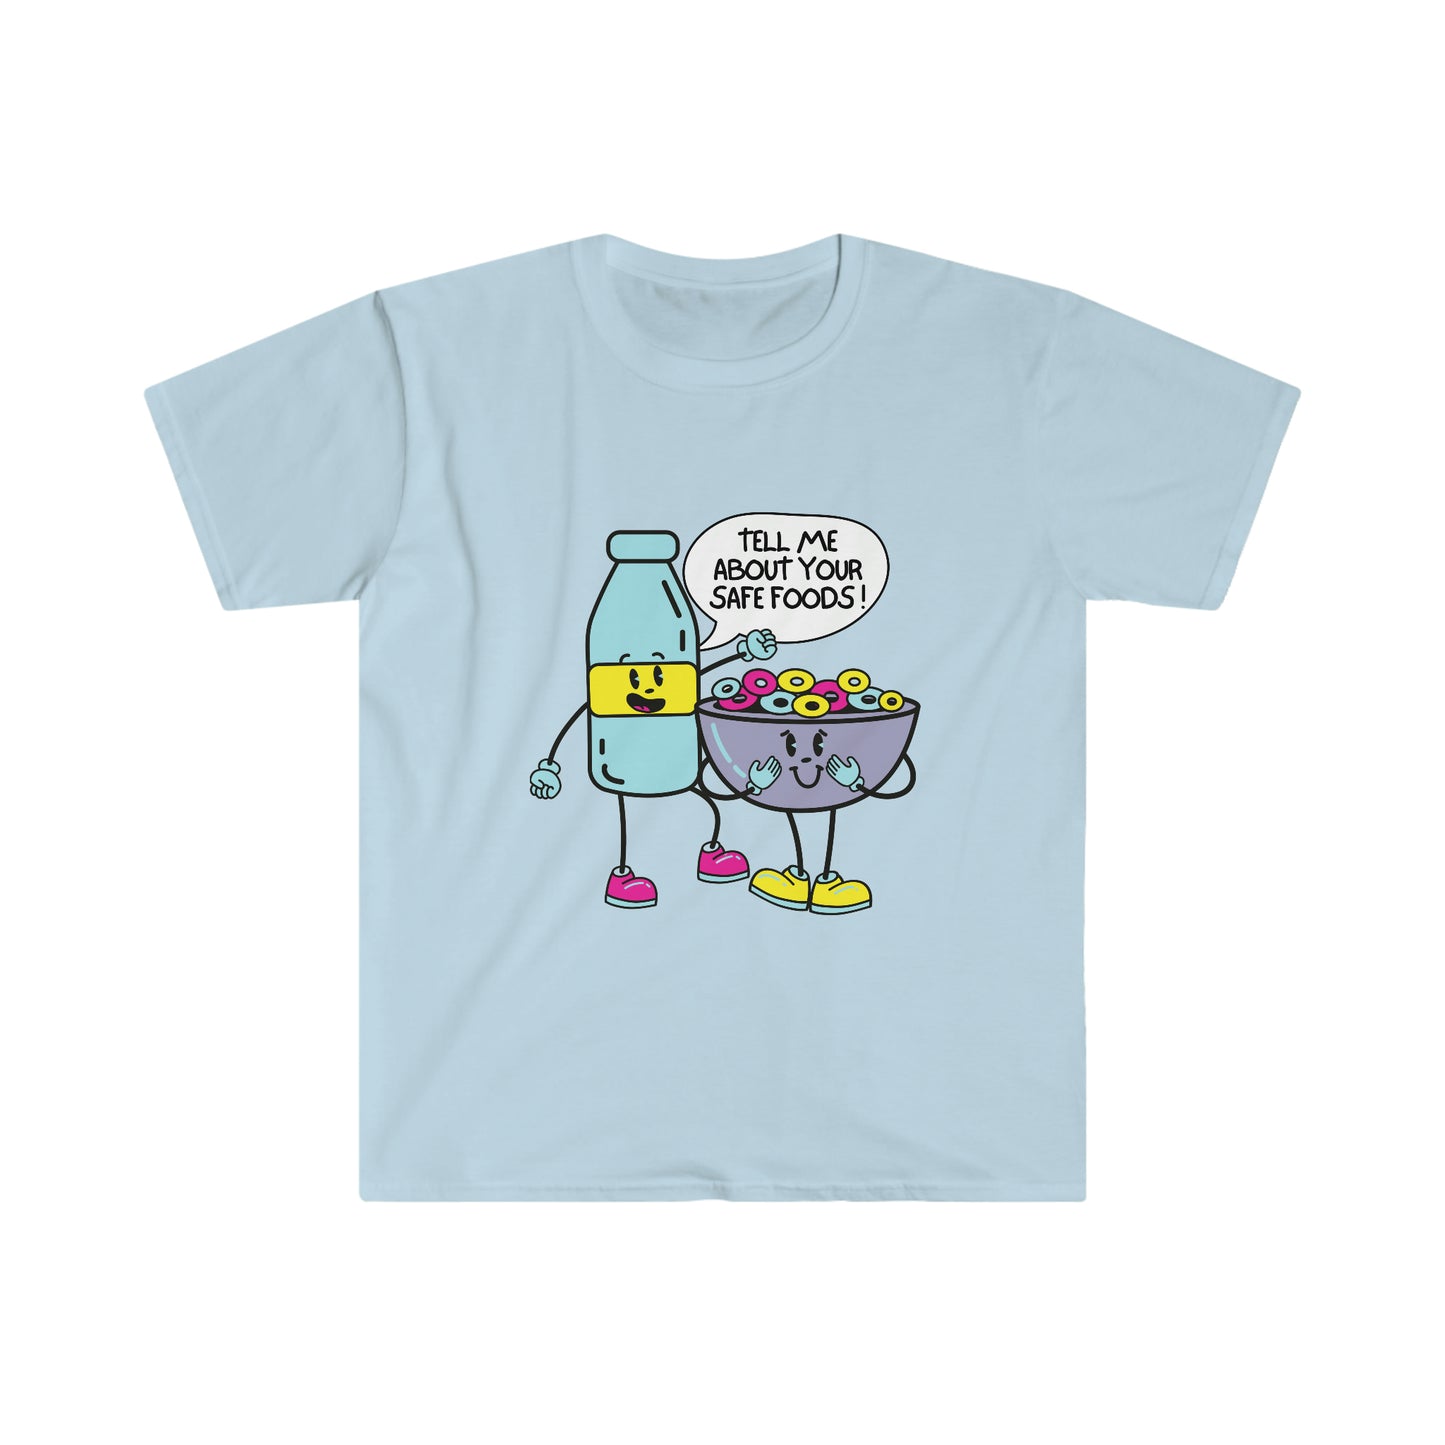 "Tell Me About Your Safe Foods!" Unisex Softstyle T-Shirt